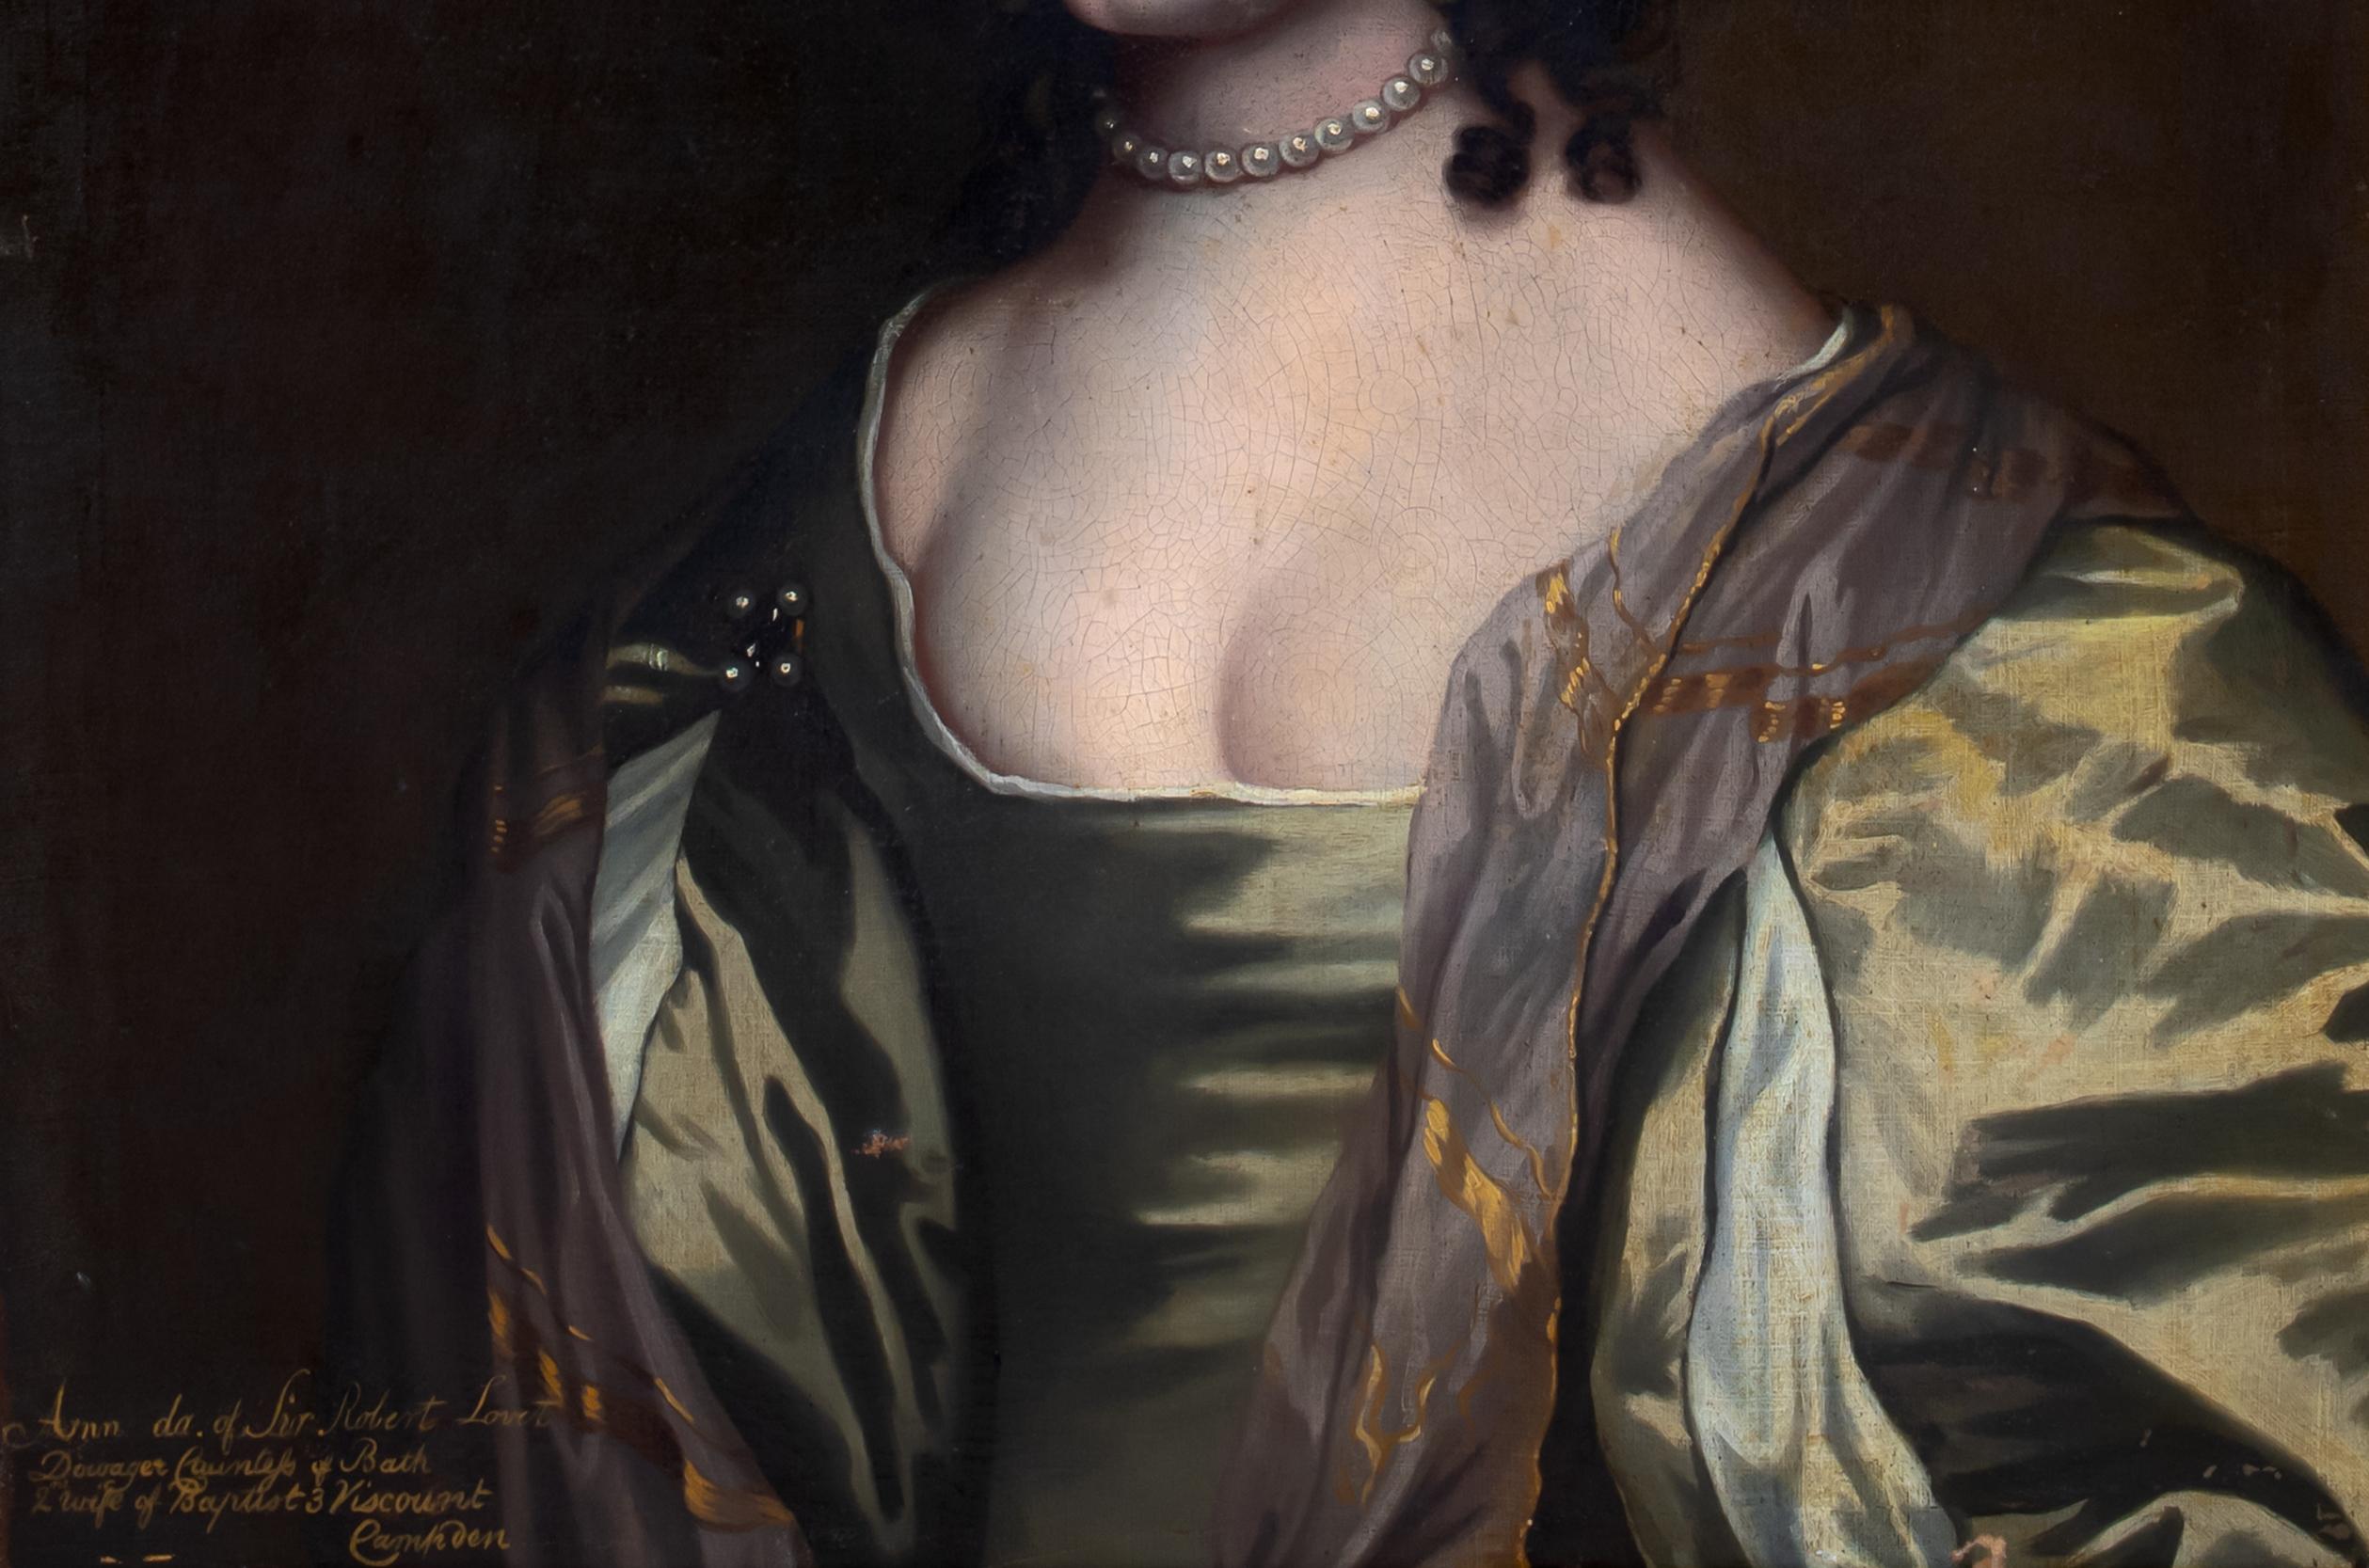 Portrait of Anne Bourchier Countess of Bath, later Lady Ann Noel 17th Century

SIR ANTHONY VAN DYCK (1599-1641)

Large 17th Century portrait of Anne Bourchier, Countess Of Bath as Lady Anne Noel, oil on canvas. Excellent quality and condition bust